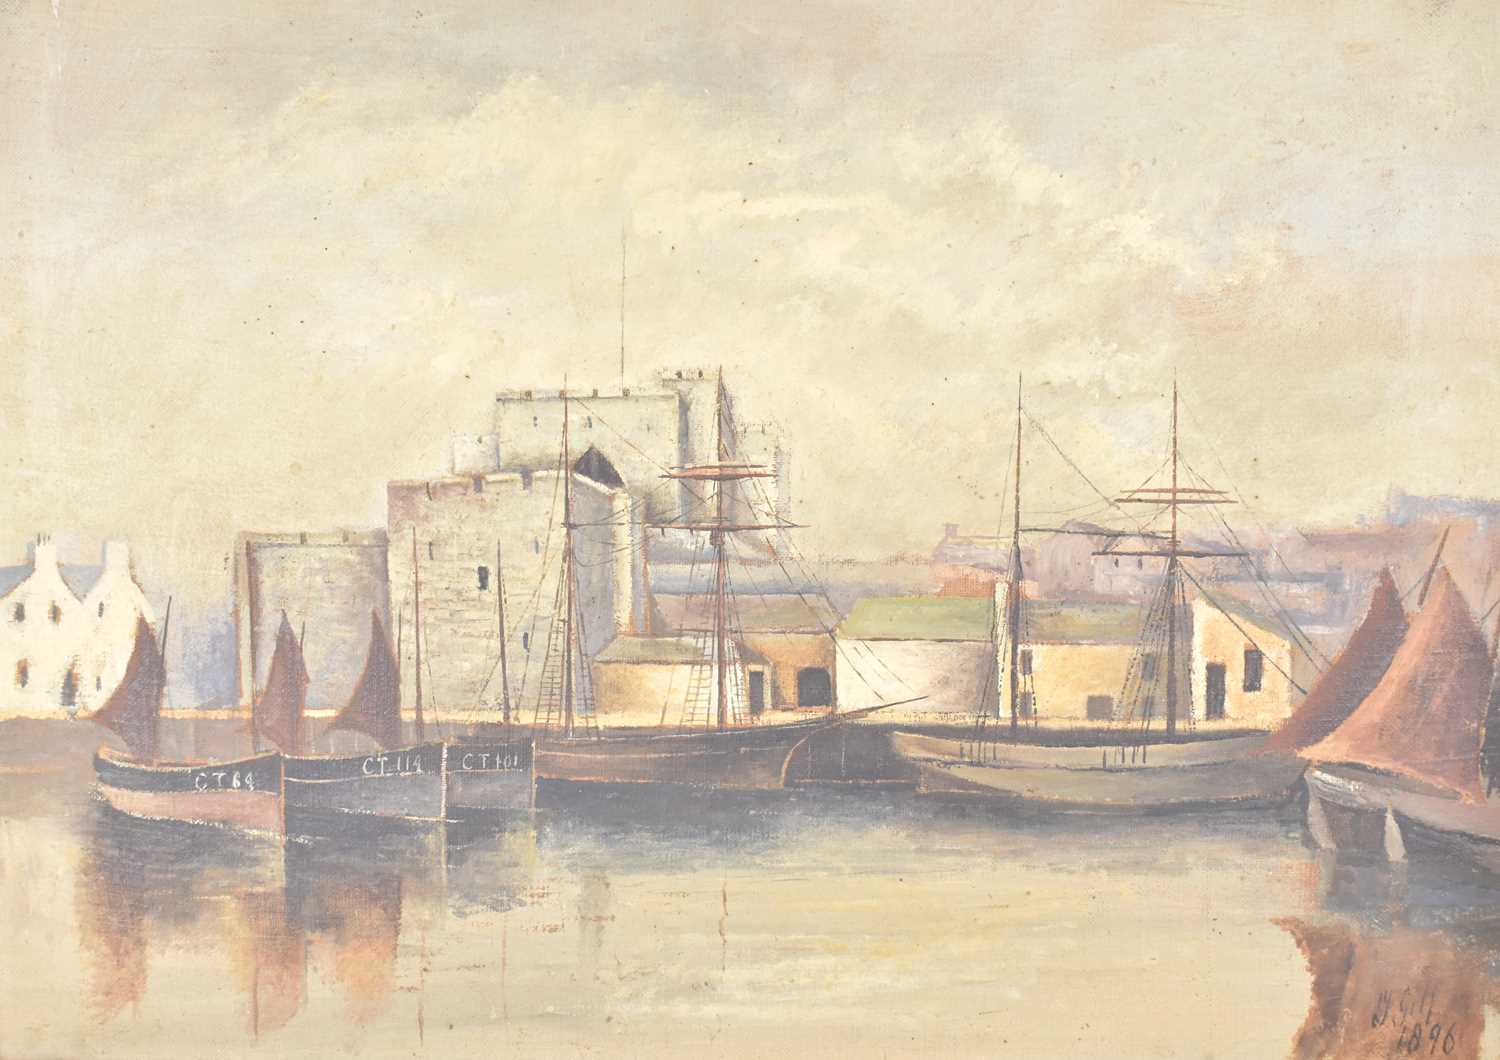 J. GILL; oil on canvas, harbour scene, signed and dated 1896 lower right, 36 x 51cm, in gilt wood - Image 2 of 3